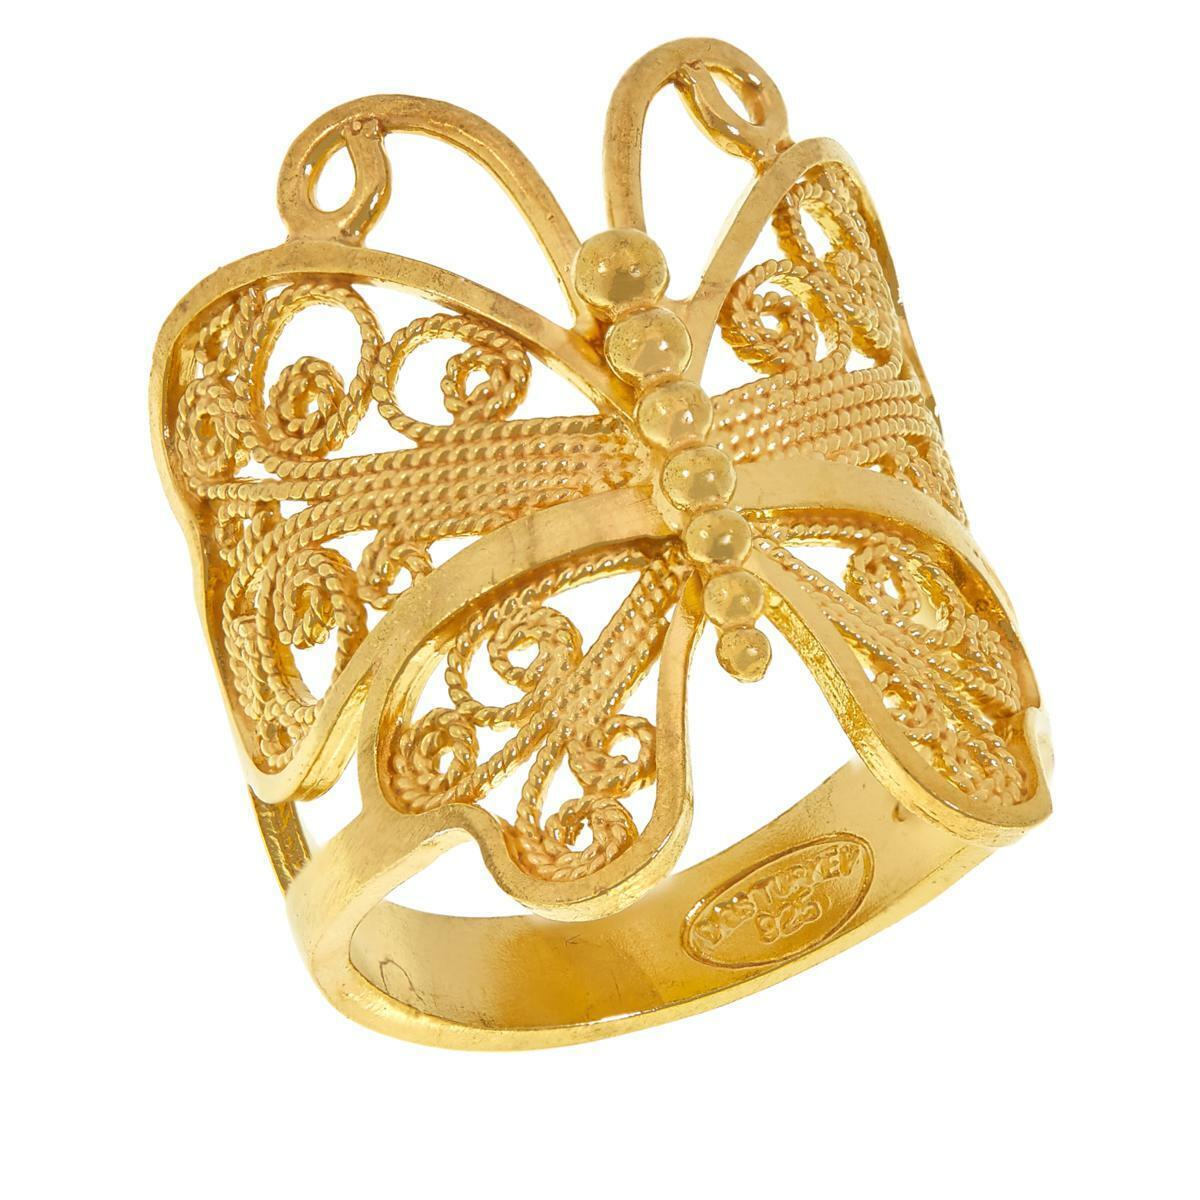 Ottoman Silver Gold-Plated Filigree Butterfly Ring, Size 6